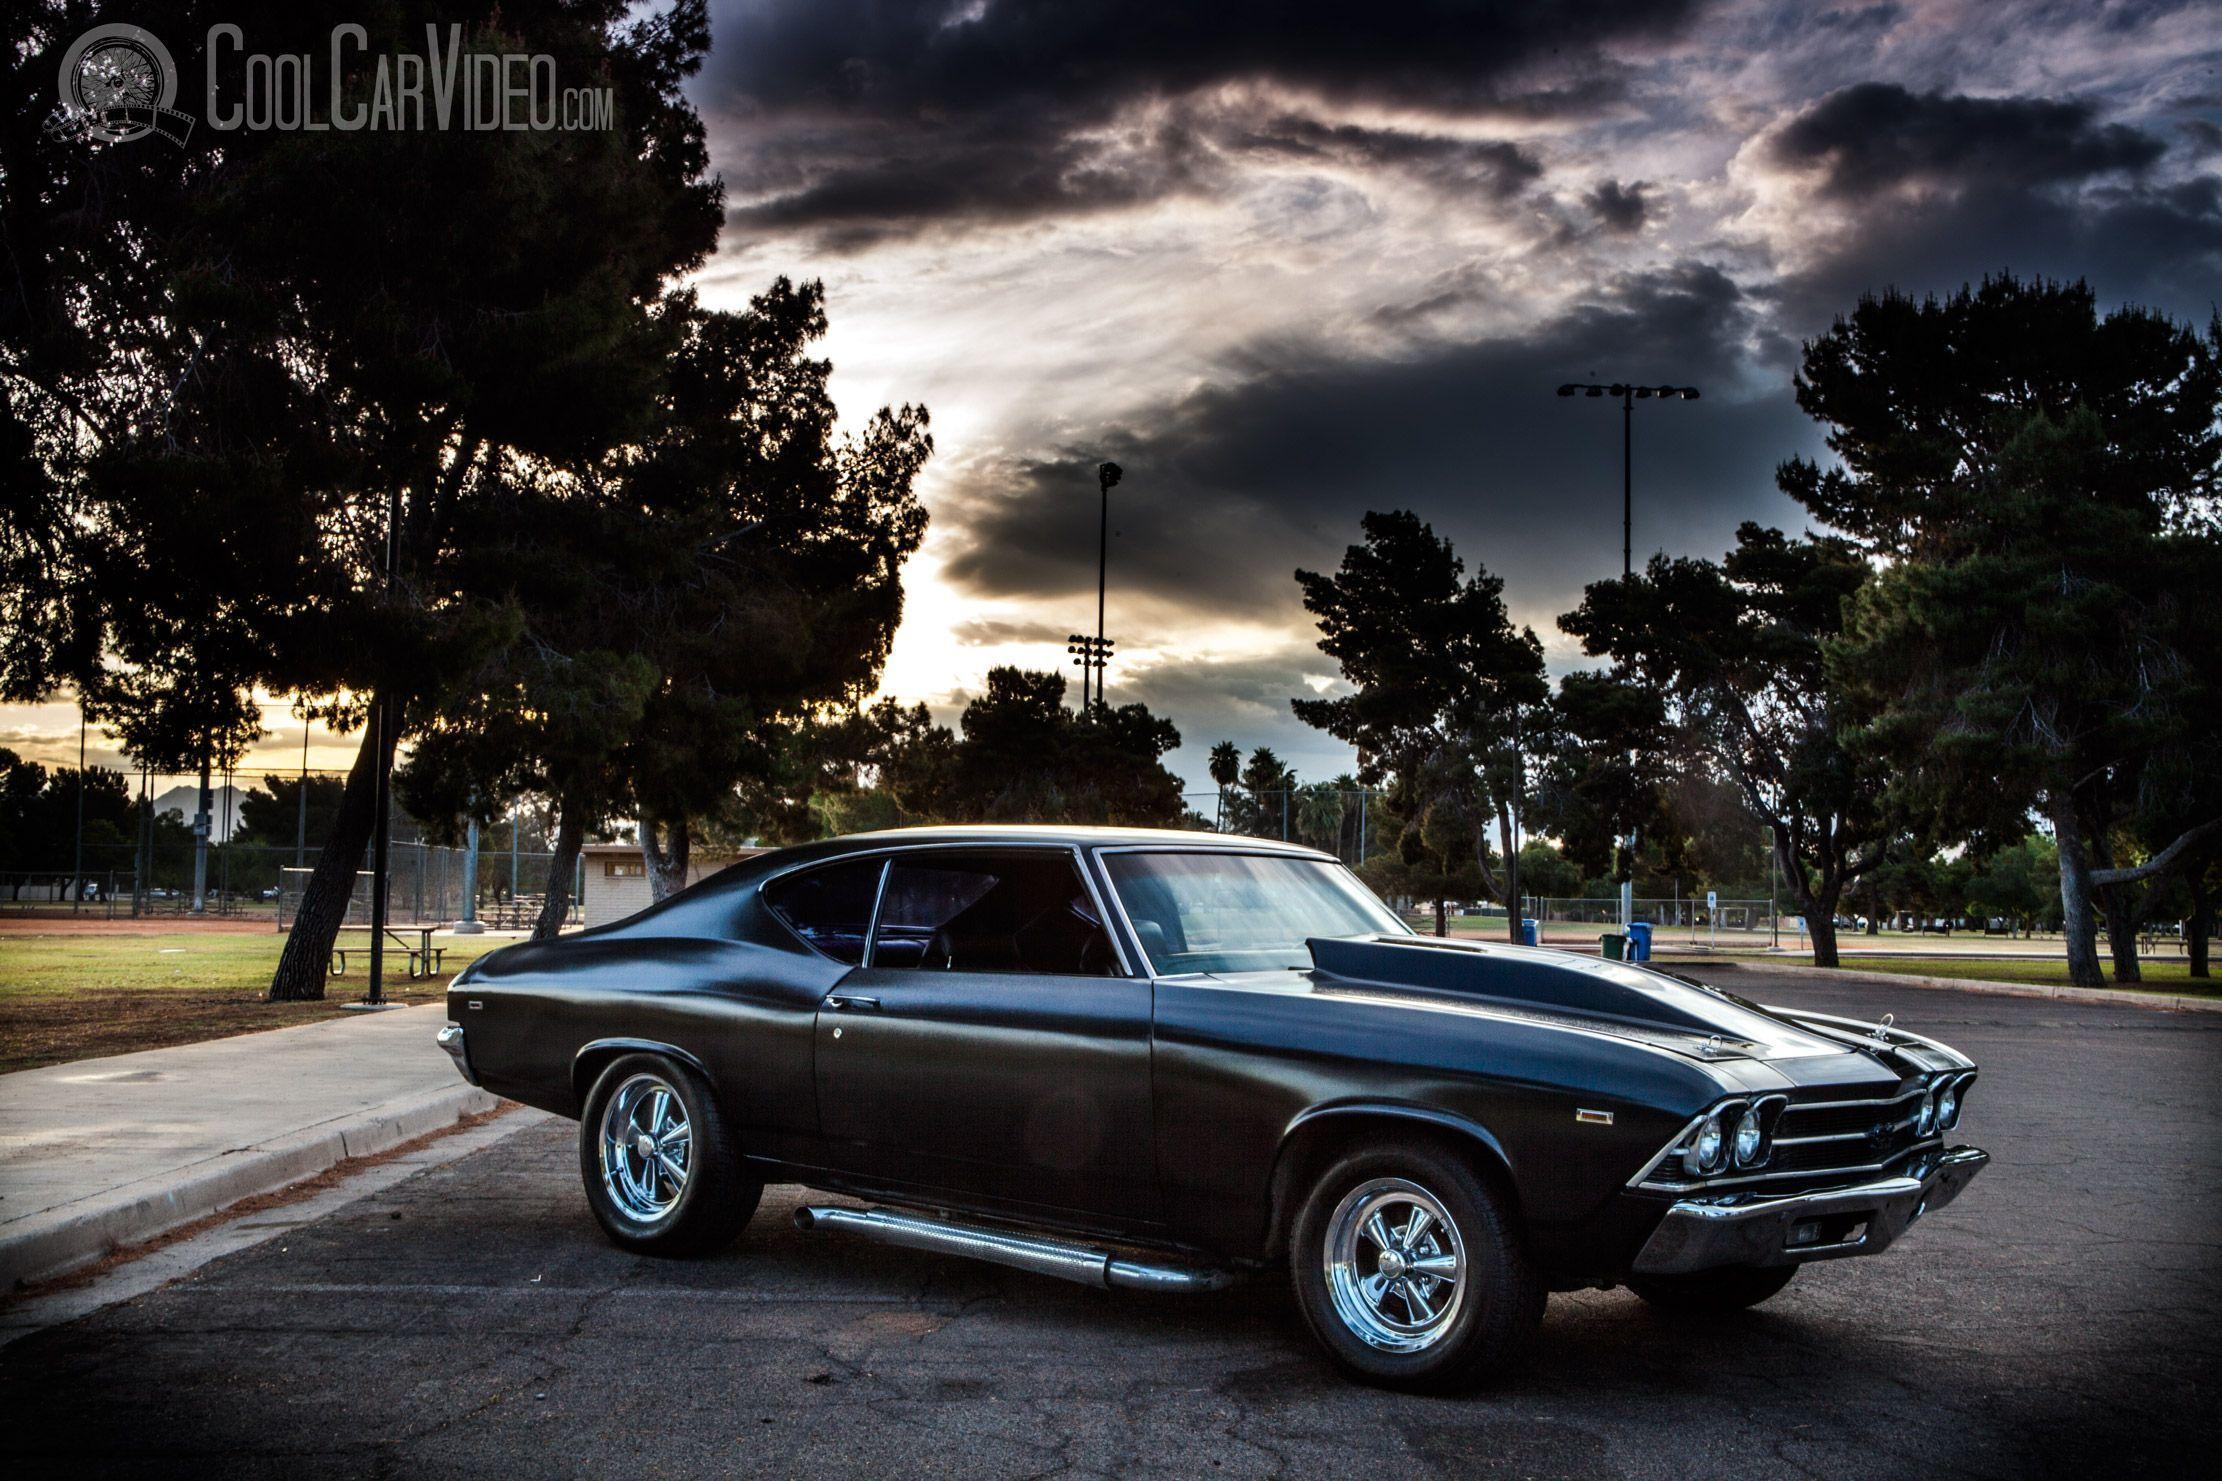 Chevelle Wallpapers - Wallpaper Cave